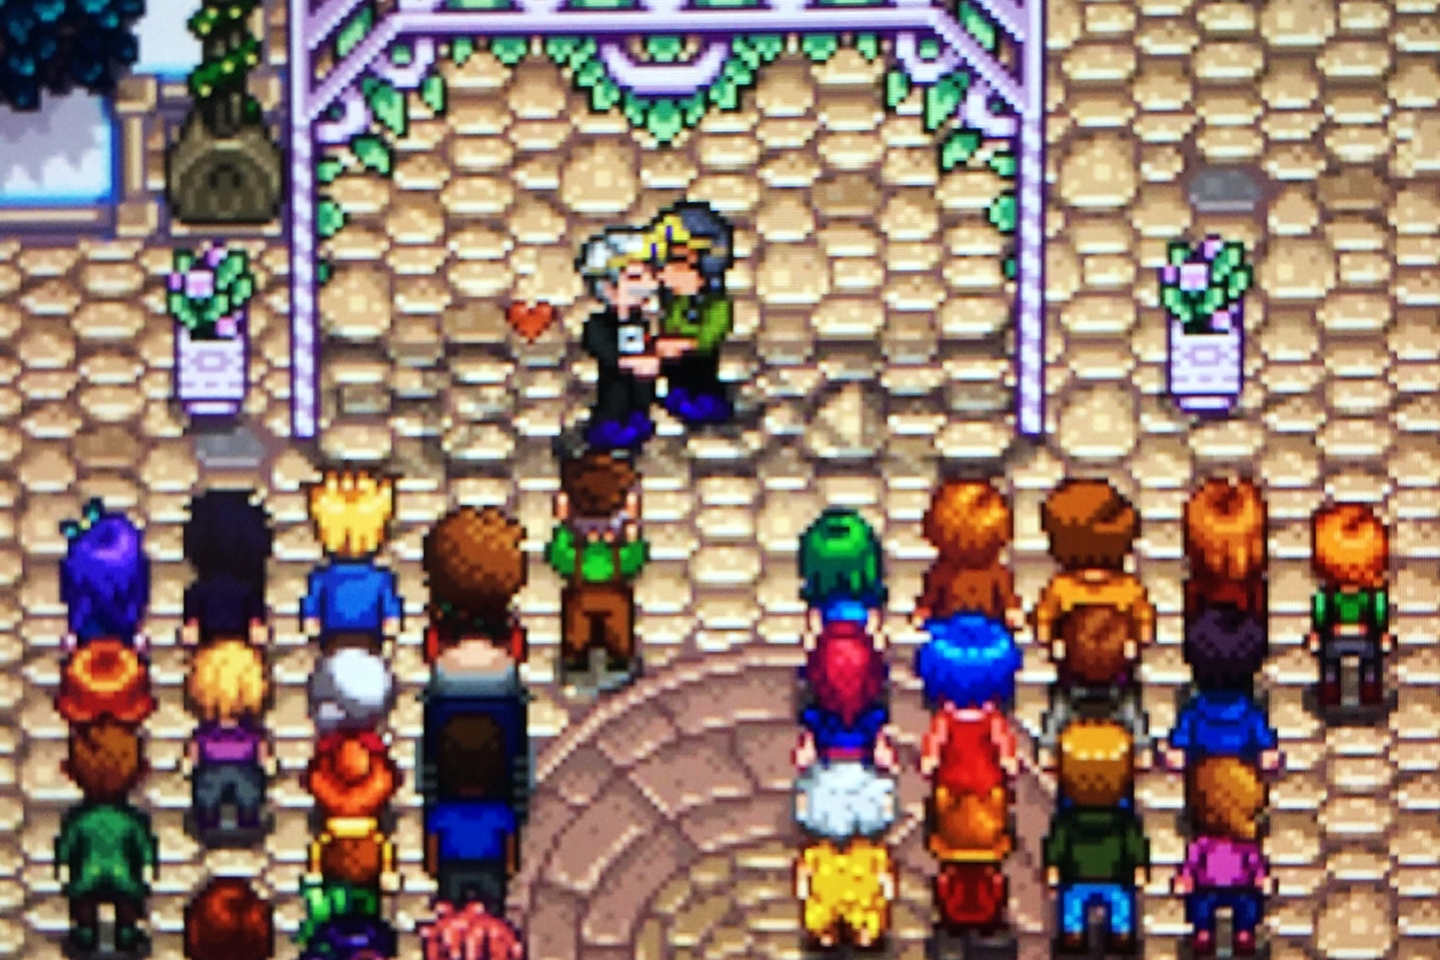 To get married in Stardew Valley multiplayer, simply gift the player with a Wedding Ring.